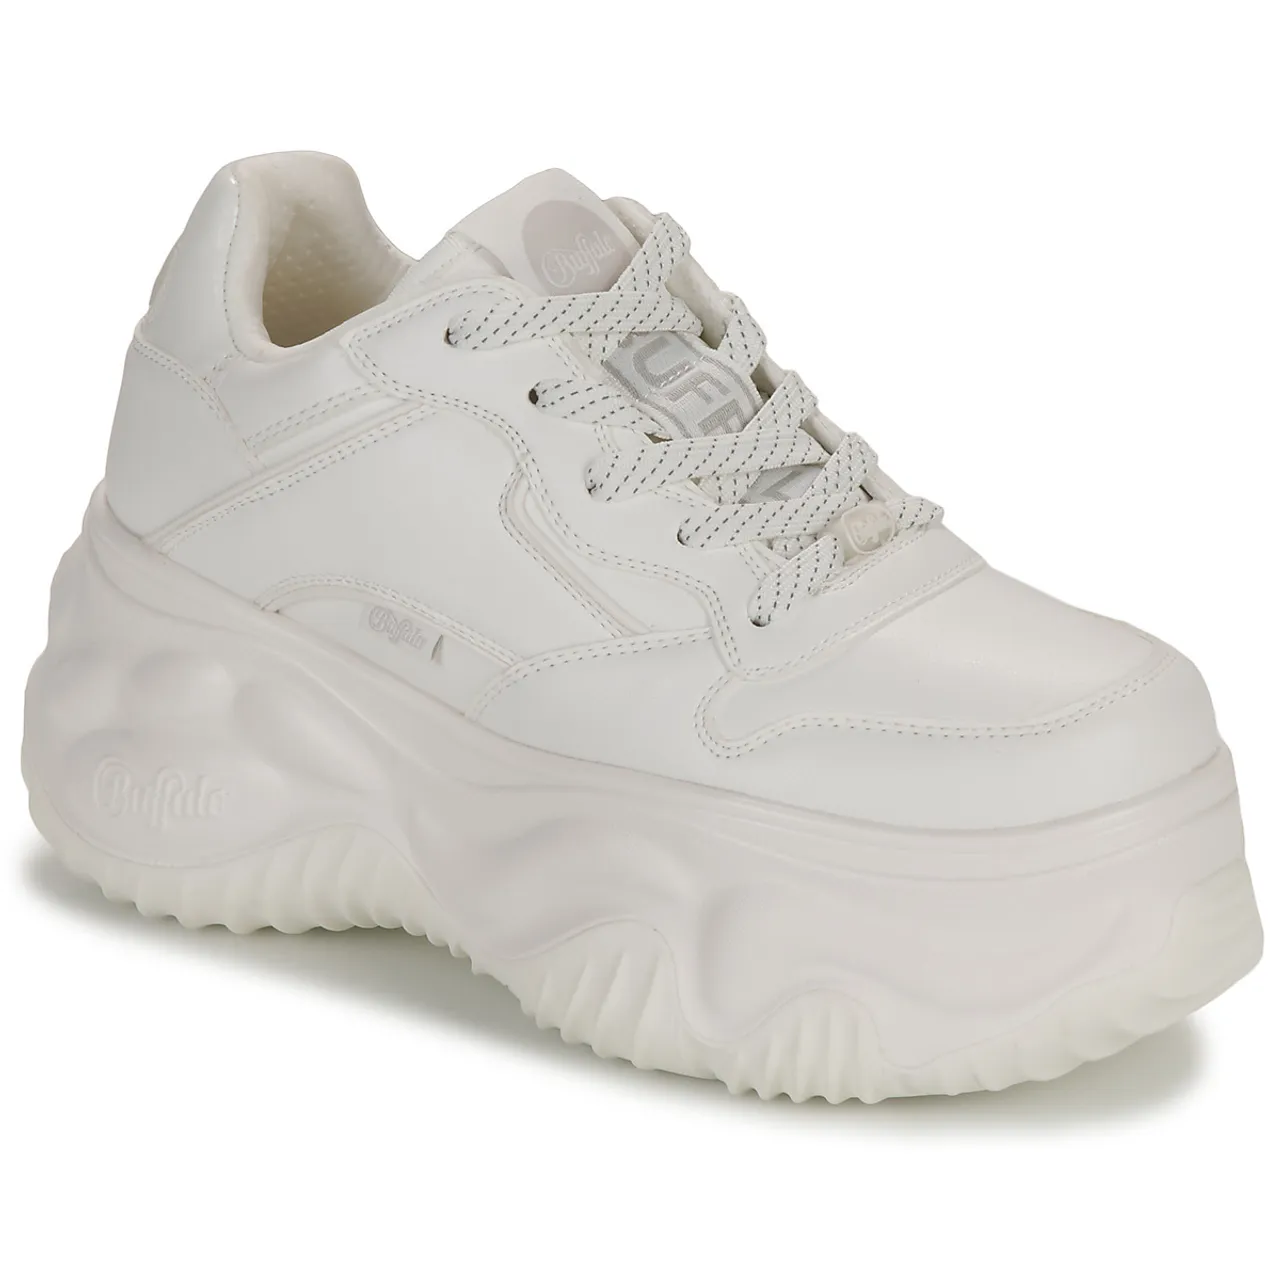 Buffalo  BLADER ONE  women's Shoes (Trainers) in White